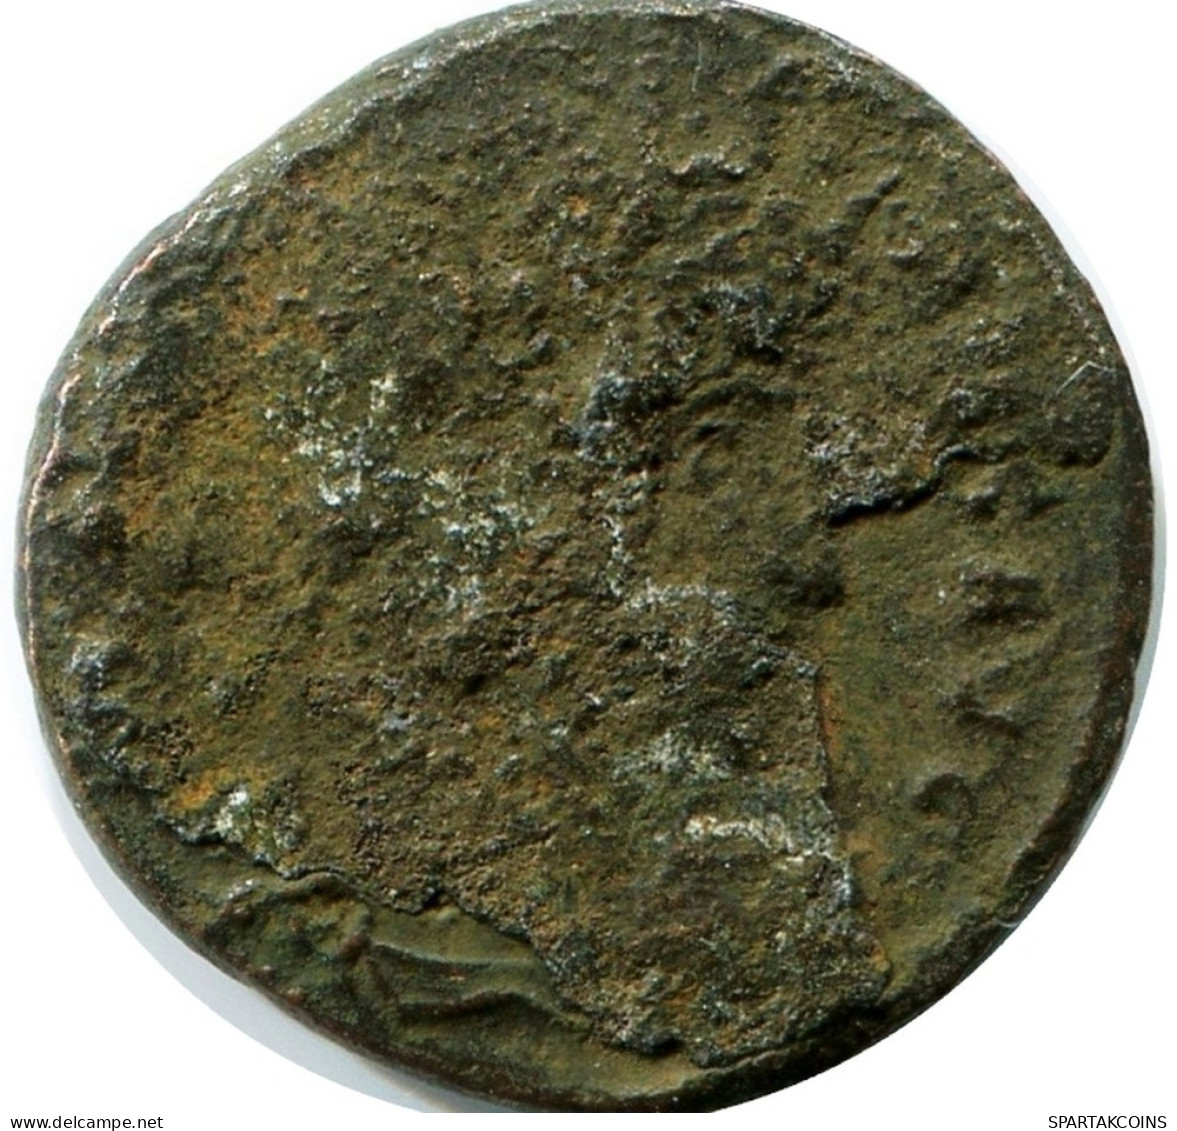 ROMAN Pièce MINTED IN ANTIOCH FROM THE ROYAL ONTARIO MUSEUM #ANC11305.14.F.A - Der Christlischen Kaiser (307 / 363)